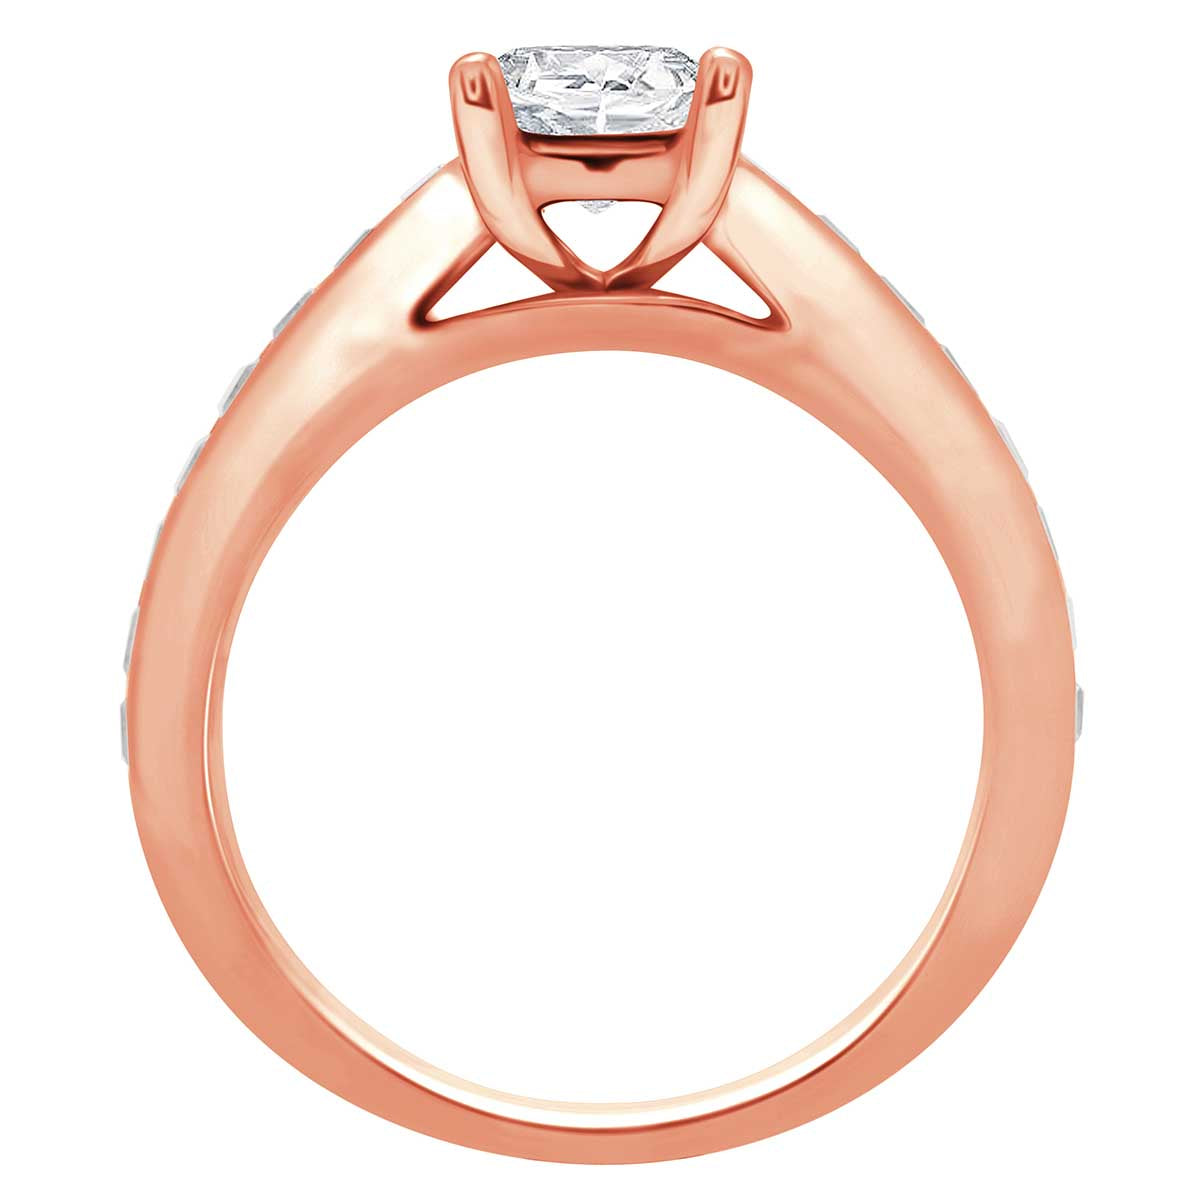 Princess Shape Diamond Ring made from rose gold standing upright